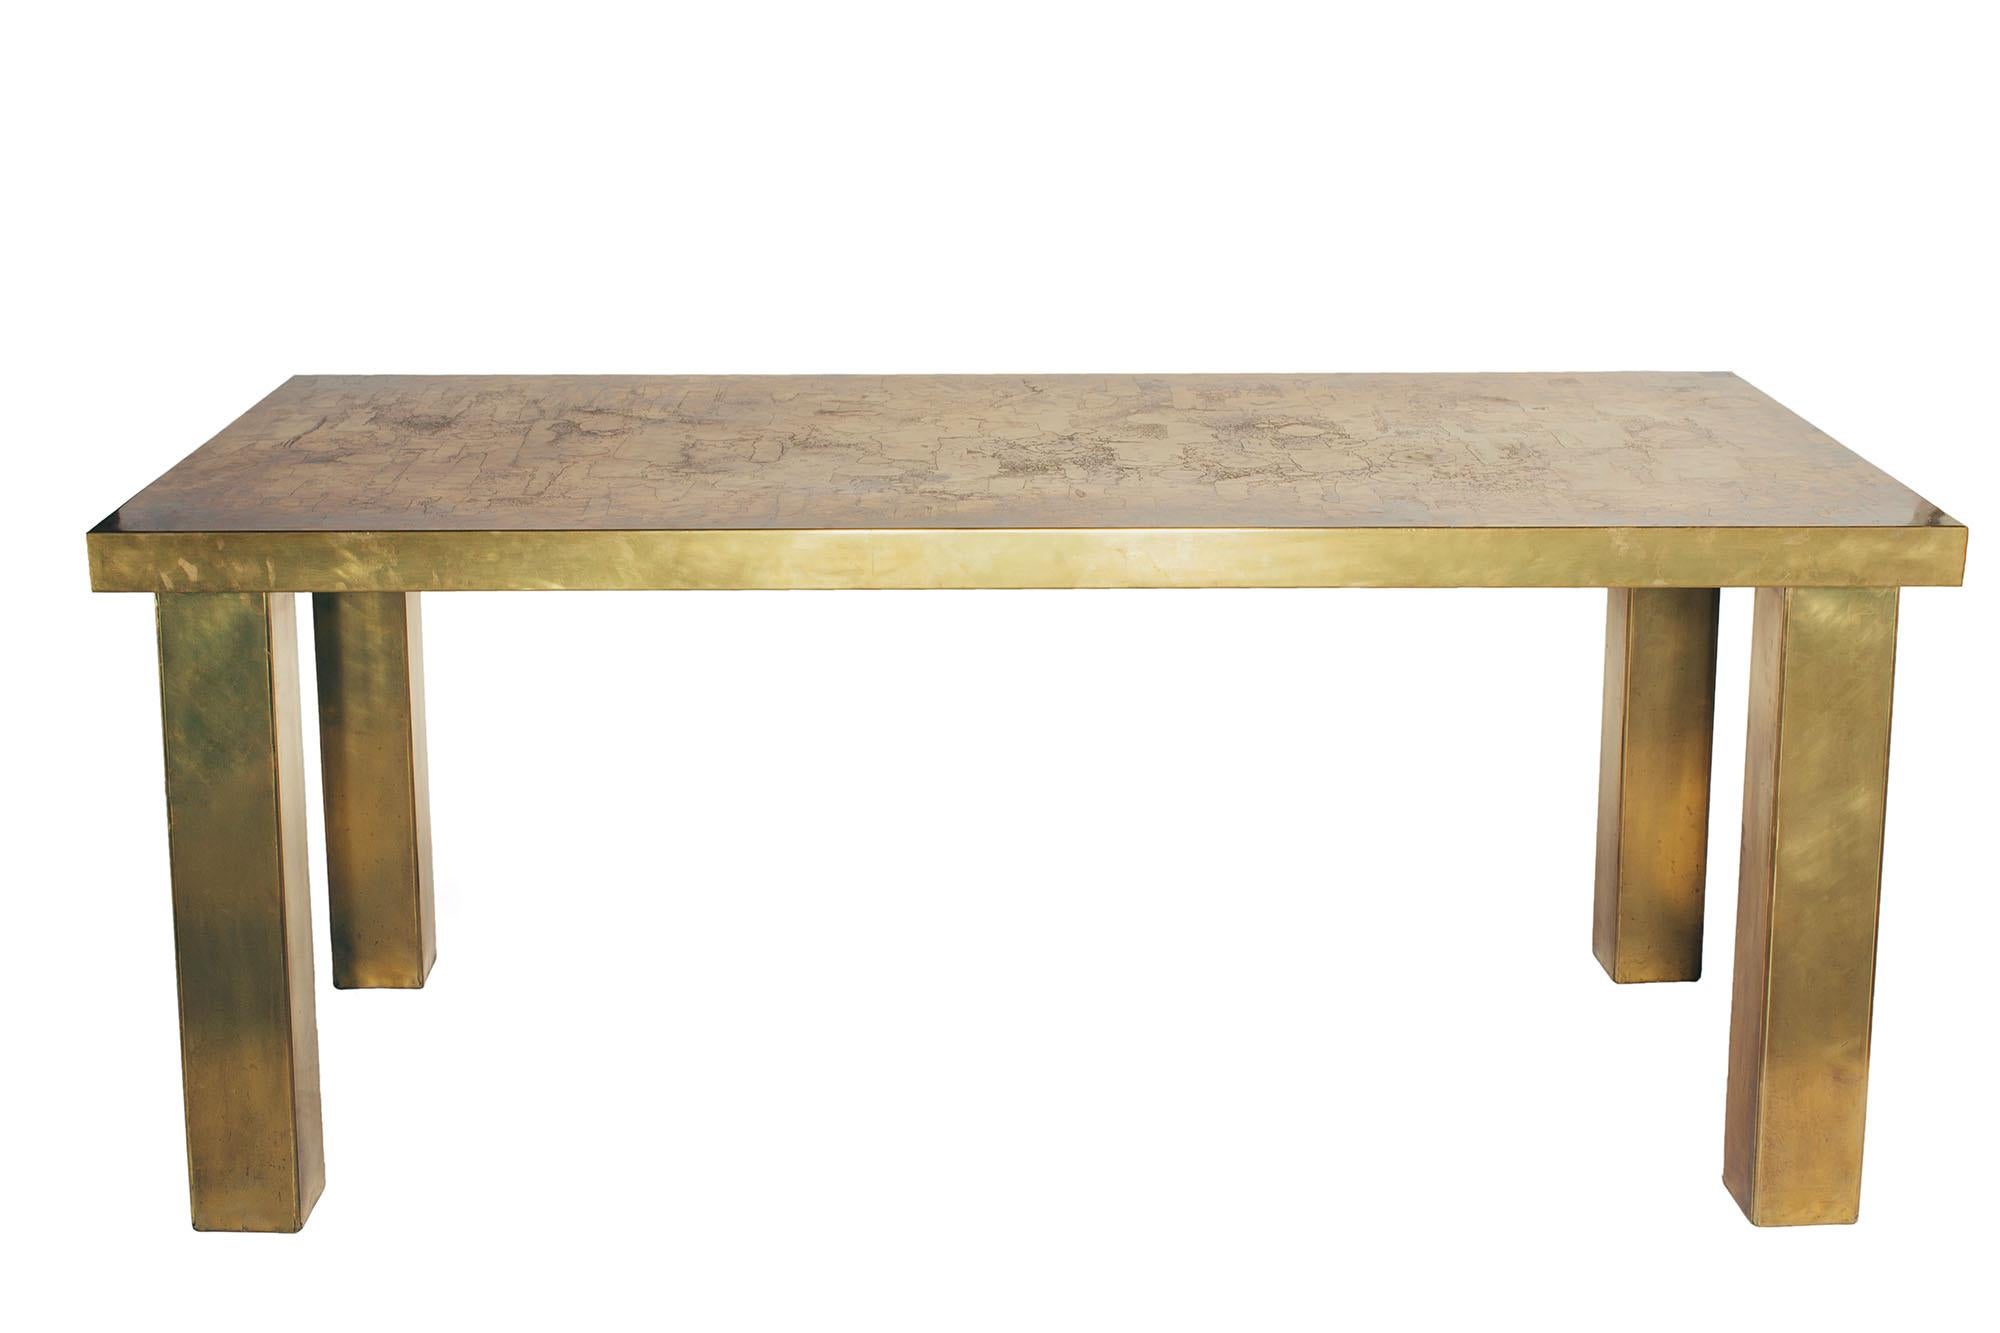 Exceptional brass dining table/desk in the Spirit of Georges Mathias, circa 1970.

Since Schumacher was founded in 1889, our family-owned company has been synonymous with style, taste, and innovation. A passion for luxury and an unwavering